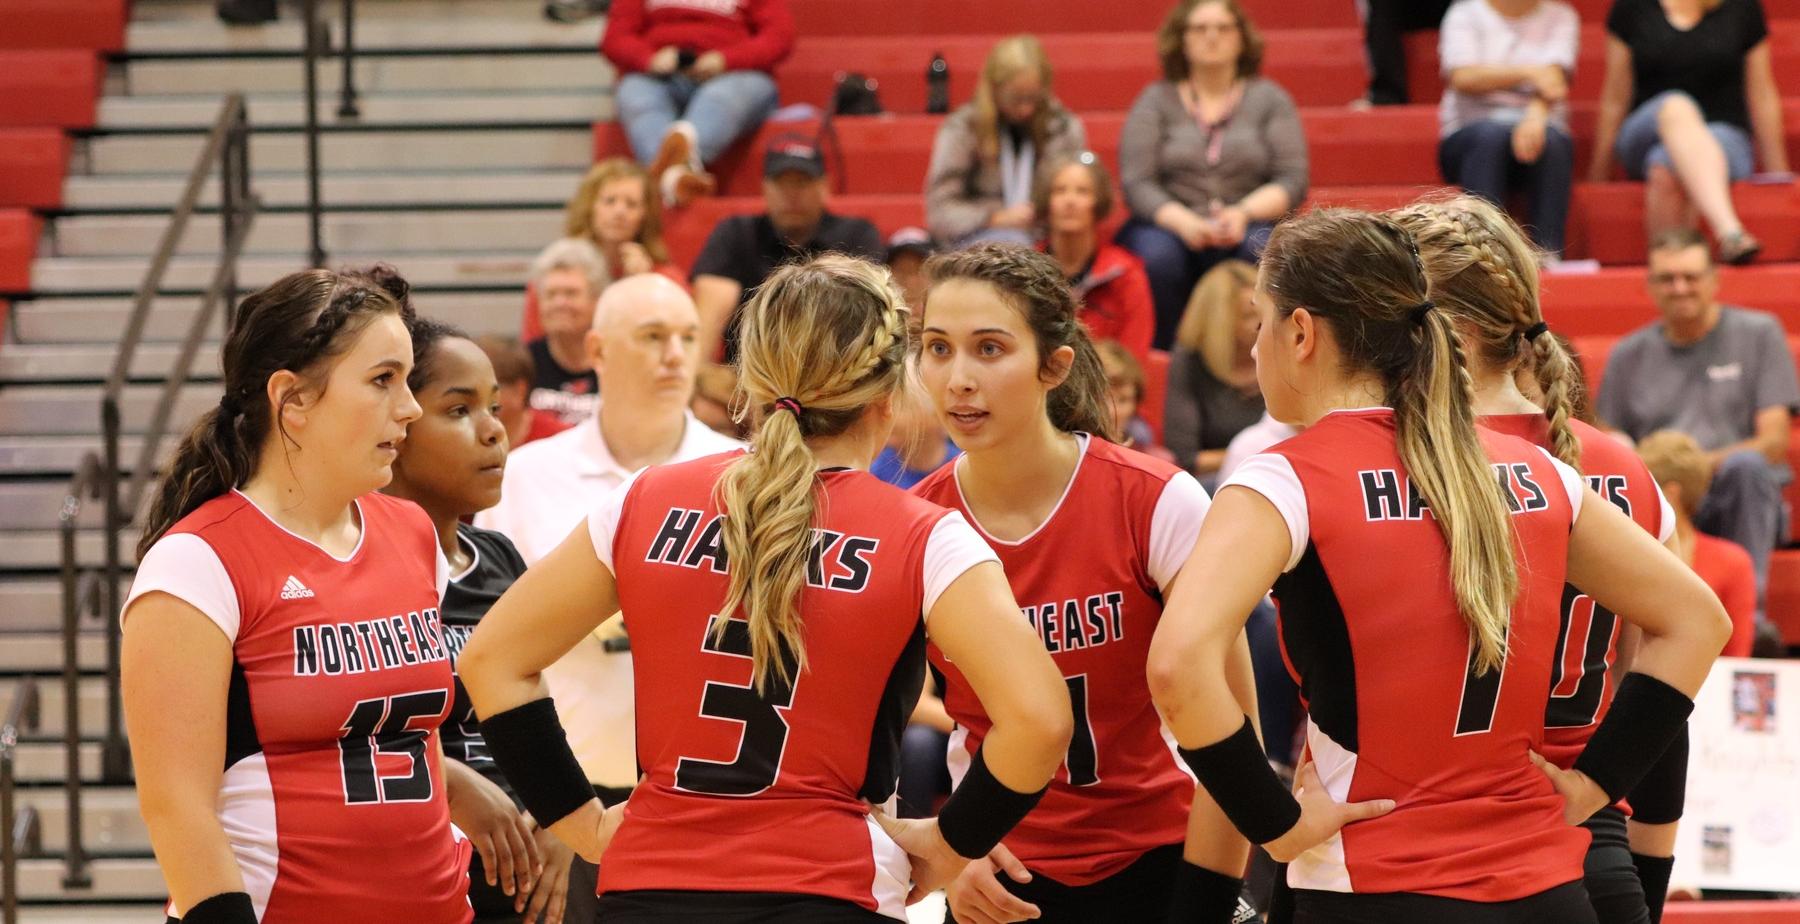 No. 16 Northeast drops first conference match to No. 14 Iowa Central